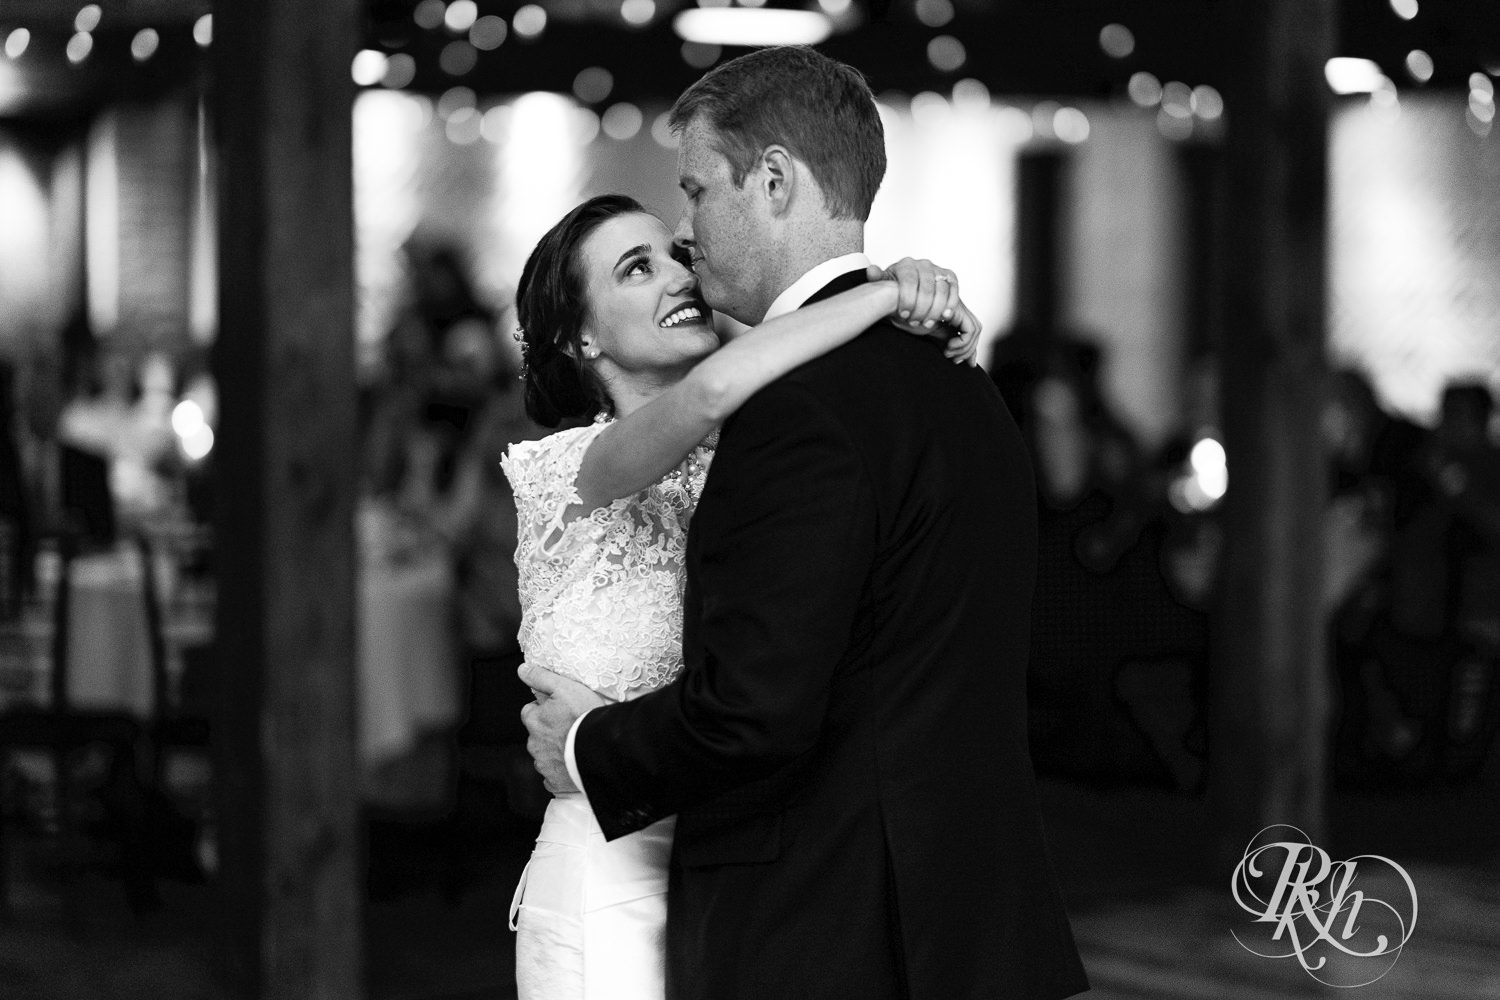 Bride and groom share first look at The Grand 1858 in Minneapolis, Minnesota.